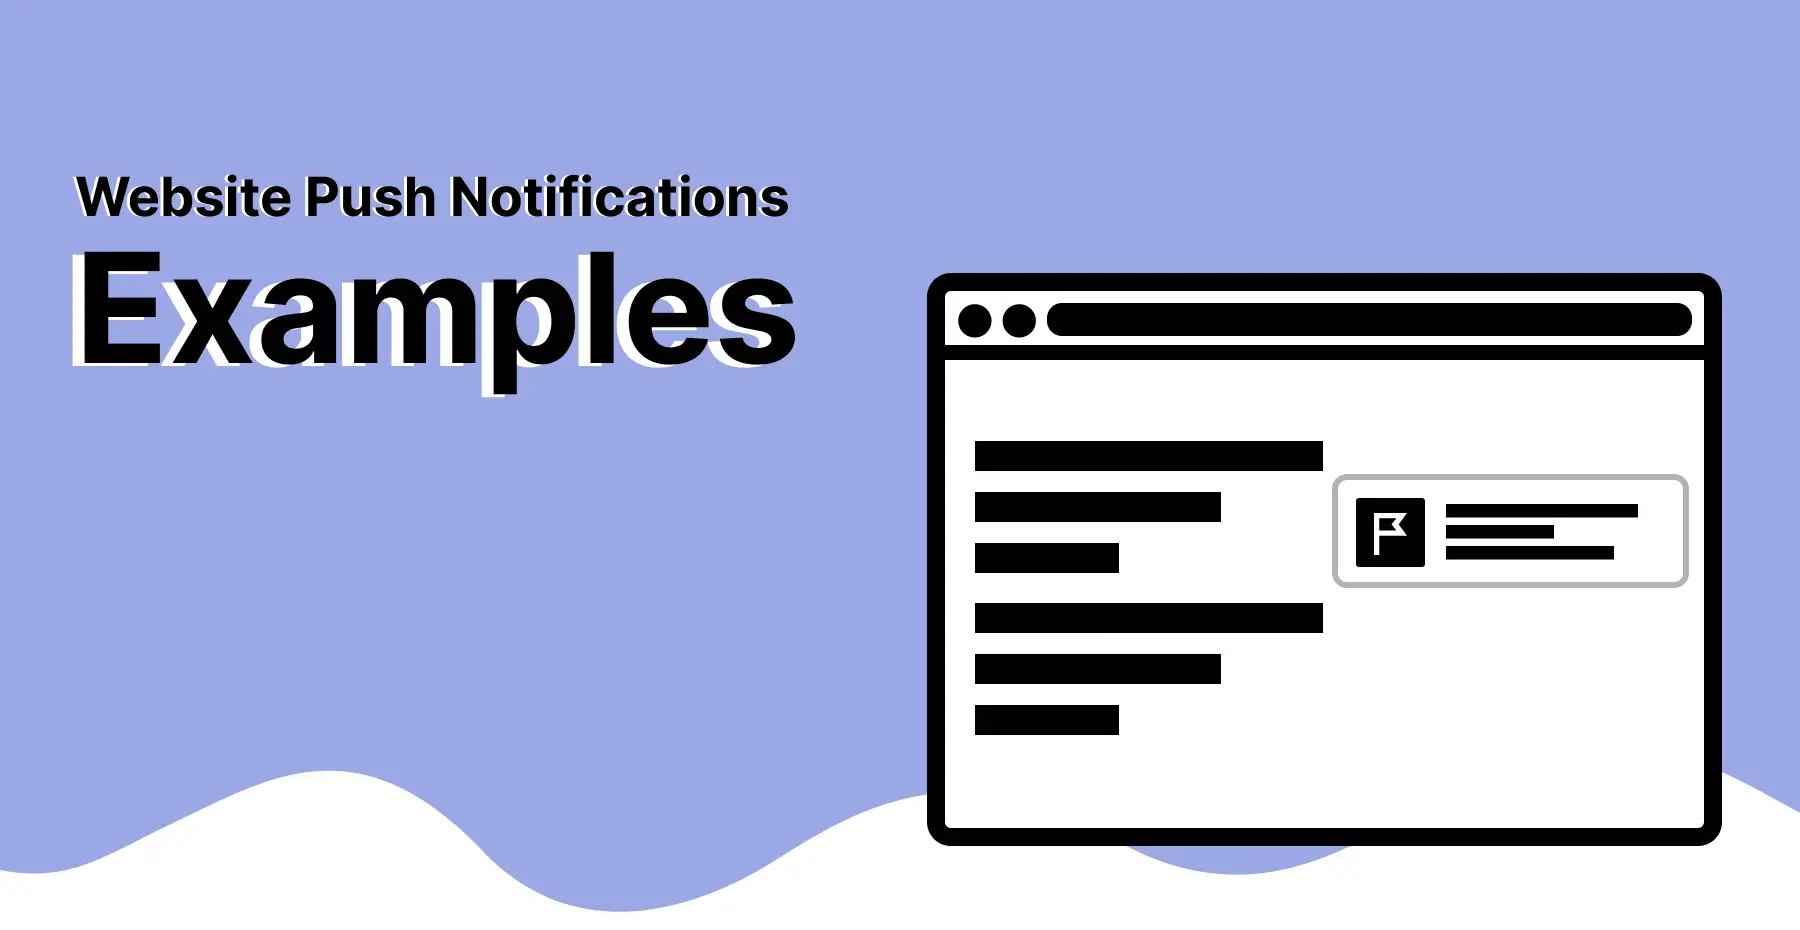 Website Push Notifications: Everything you need to know with examples